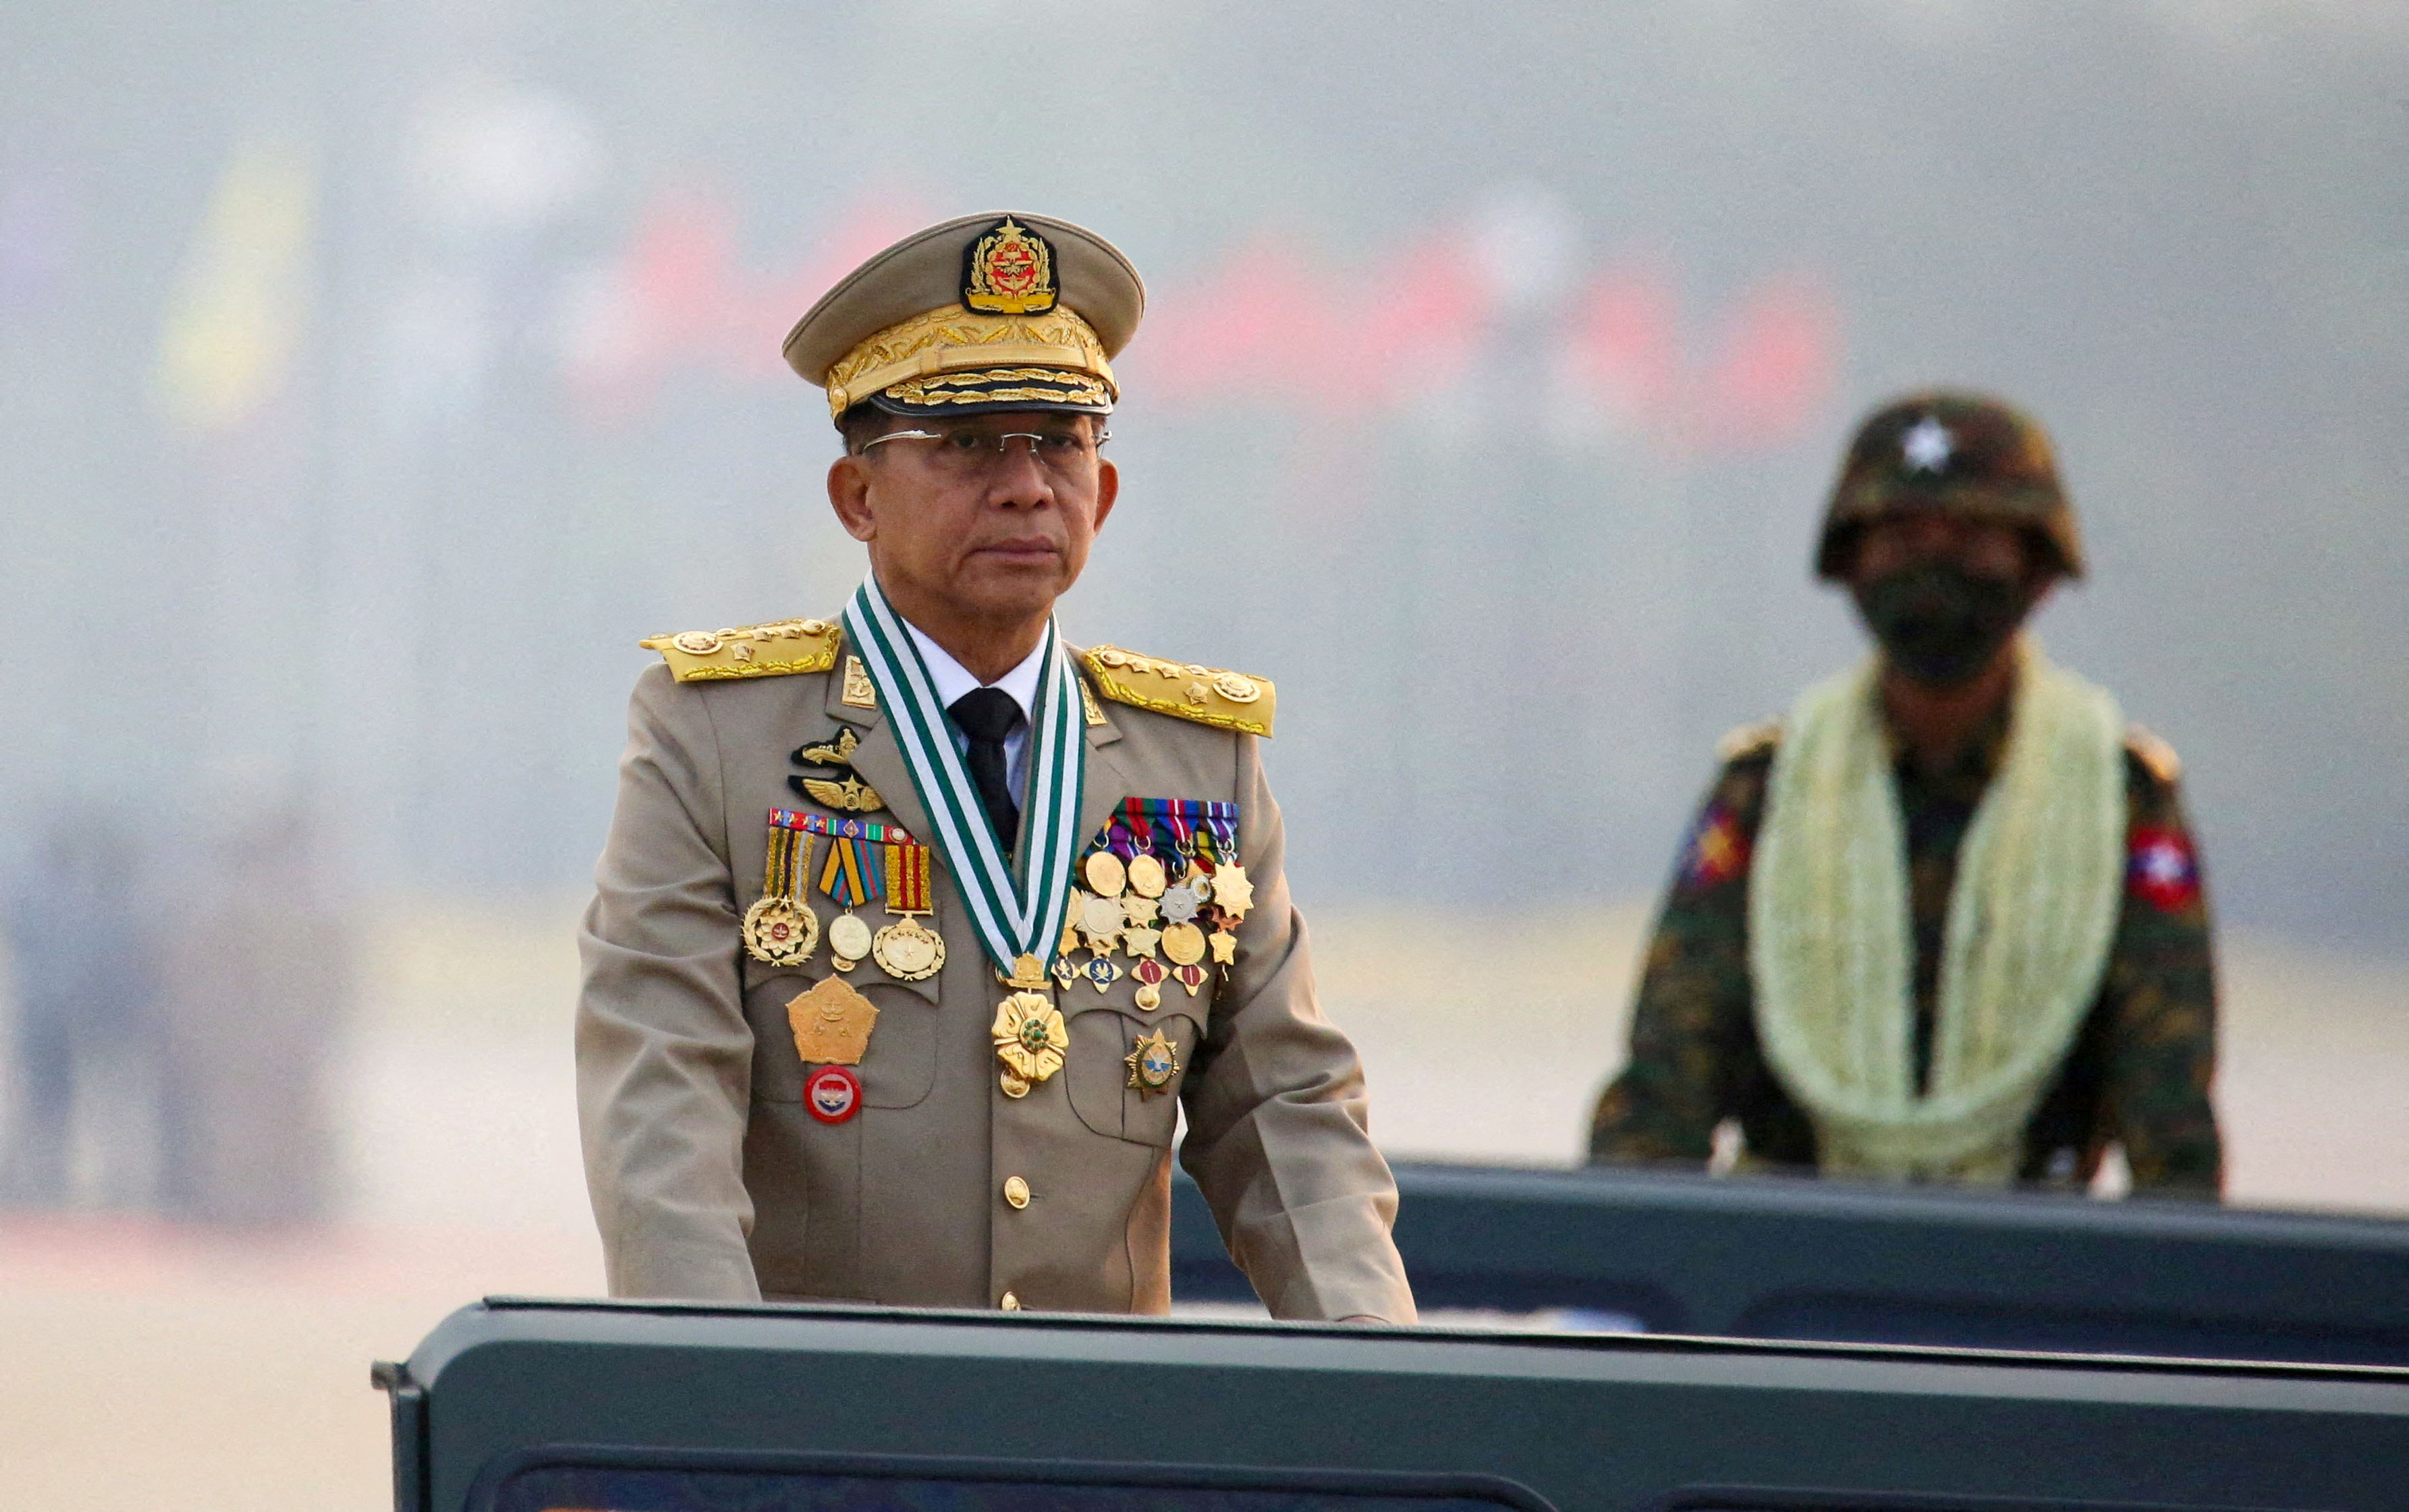 Myanmar's junta chief Senior General Min Aung Hlaing, who ousted the elected government in a coup on February 1, 2021, presides over an army parade on Armed Forces Day in Naypyitaw, Myanmar, March 27, 2021. REUTERS/Stringer/File Photo